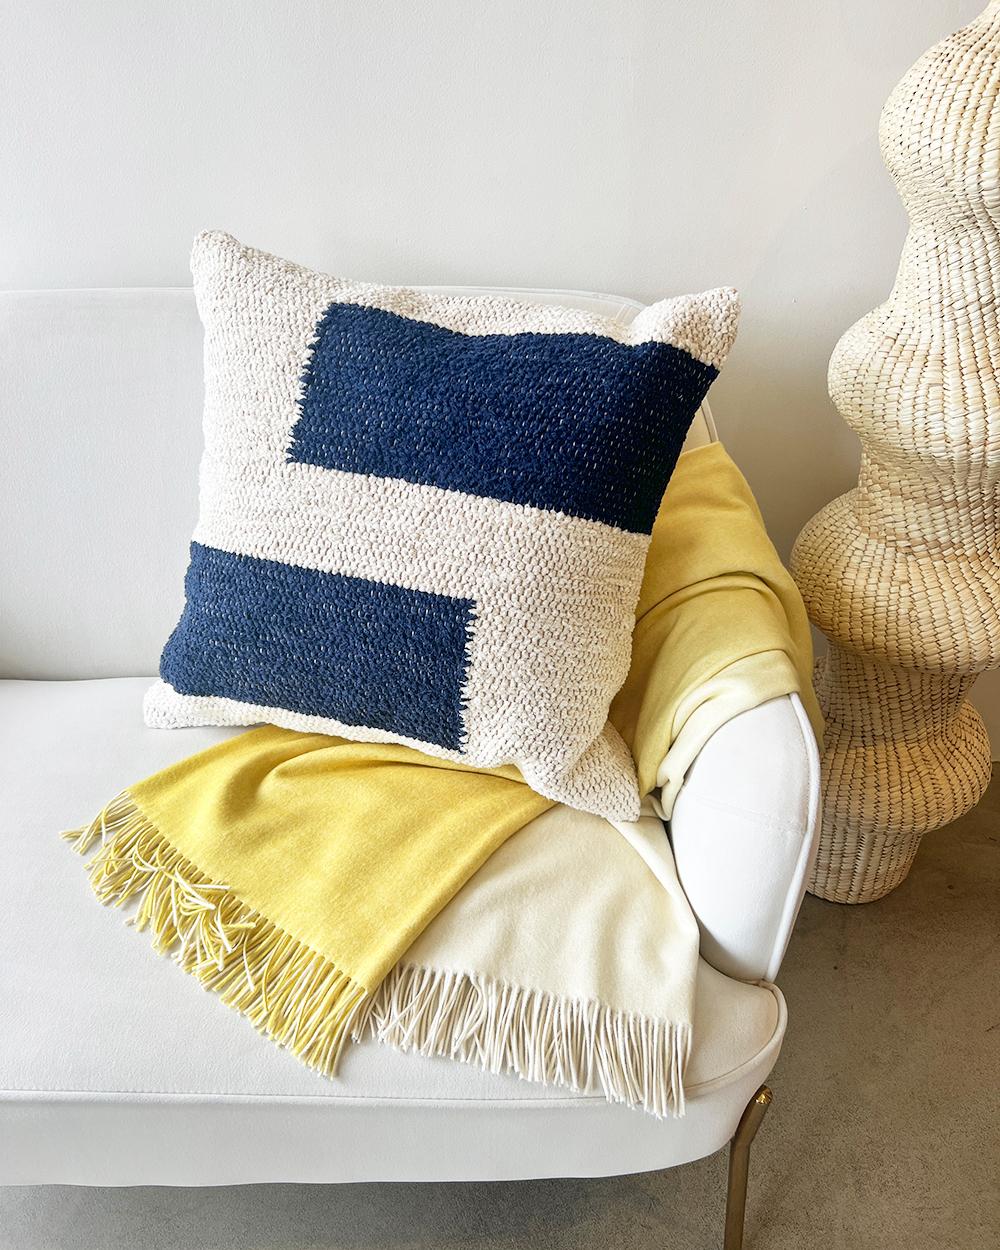 This navy and cream cotton throw pillow is made from thick handwoven cotton and is perfect for a high traffic area like the living room couch. Put two matching pillows on either side of the couch or get multiple patterns in the same color. The